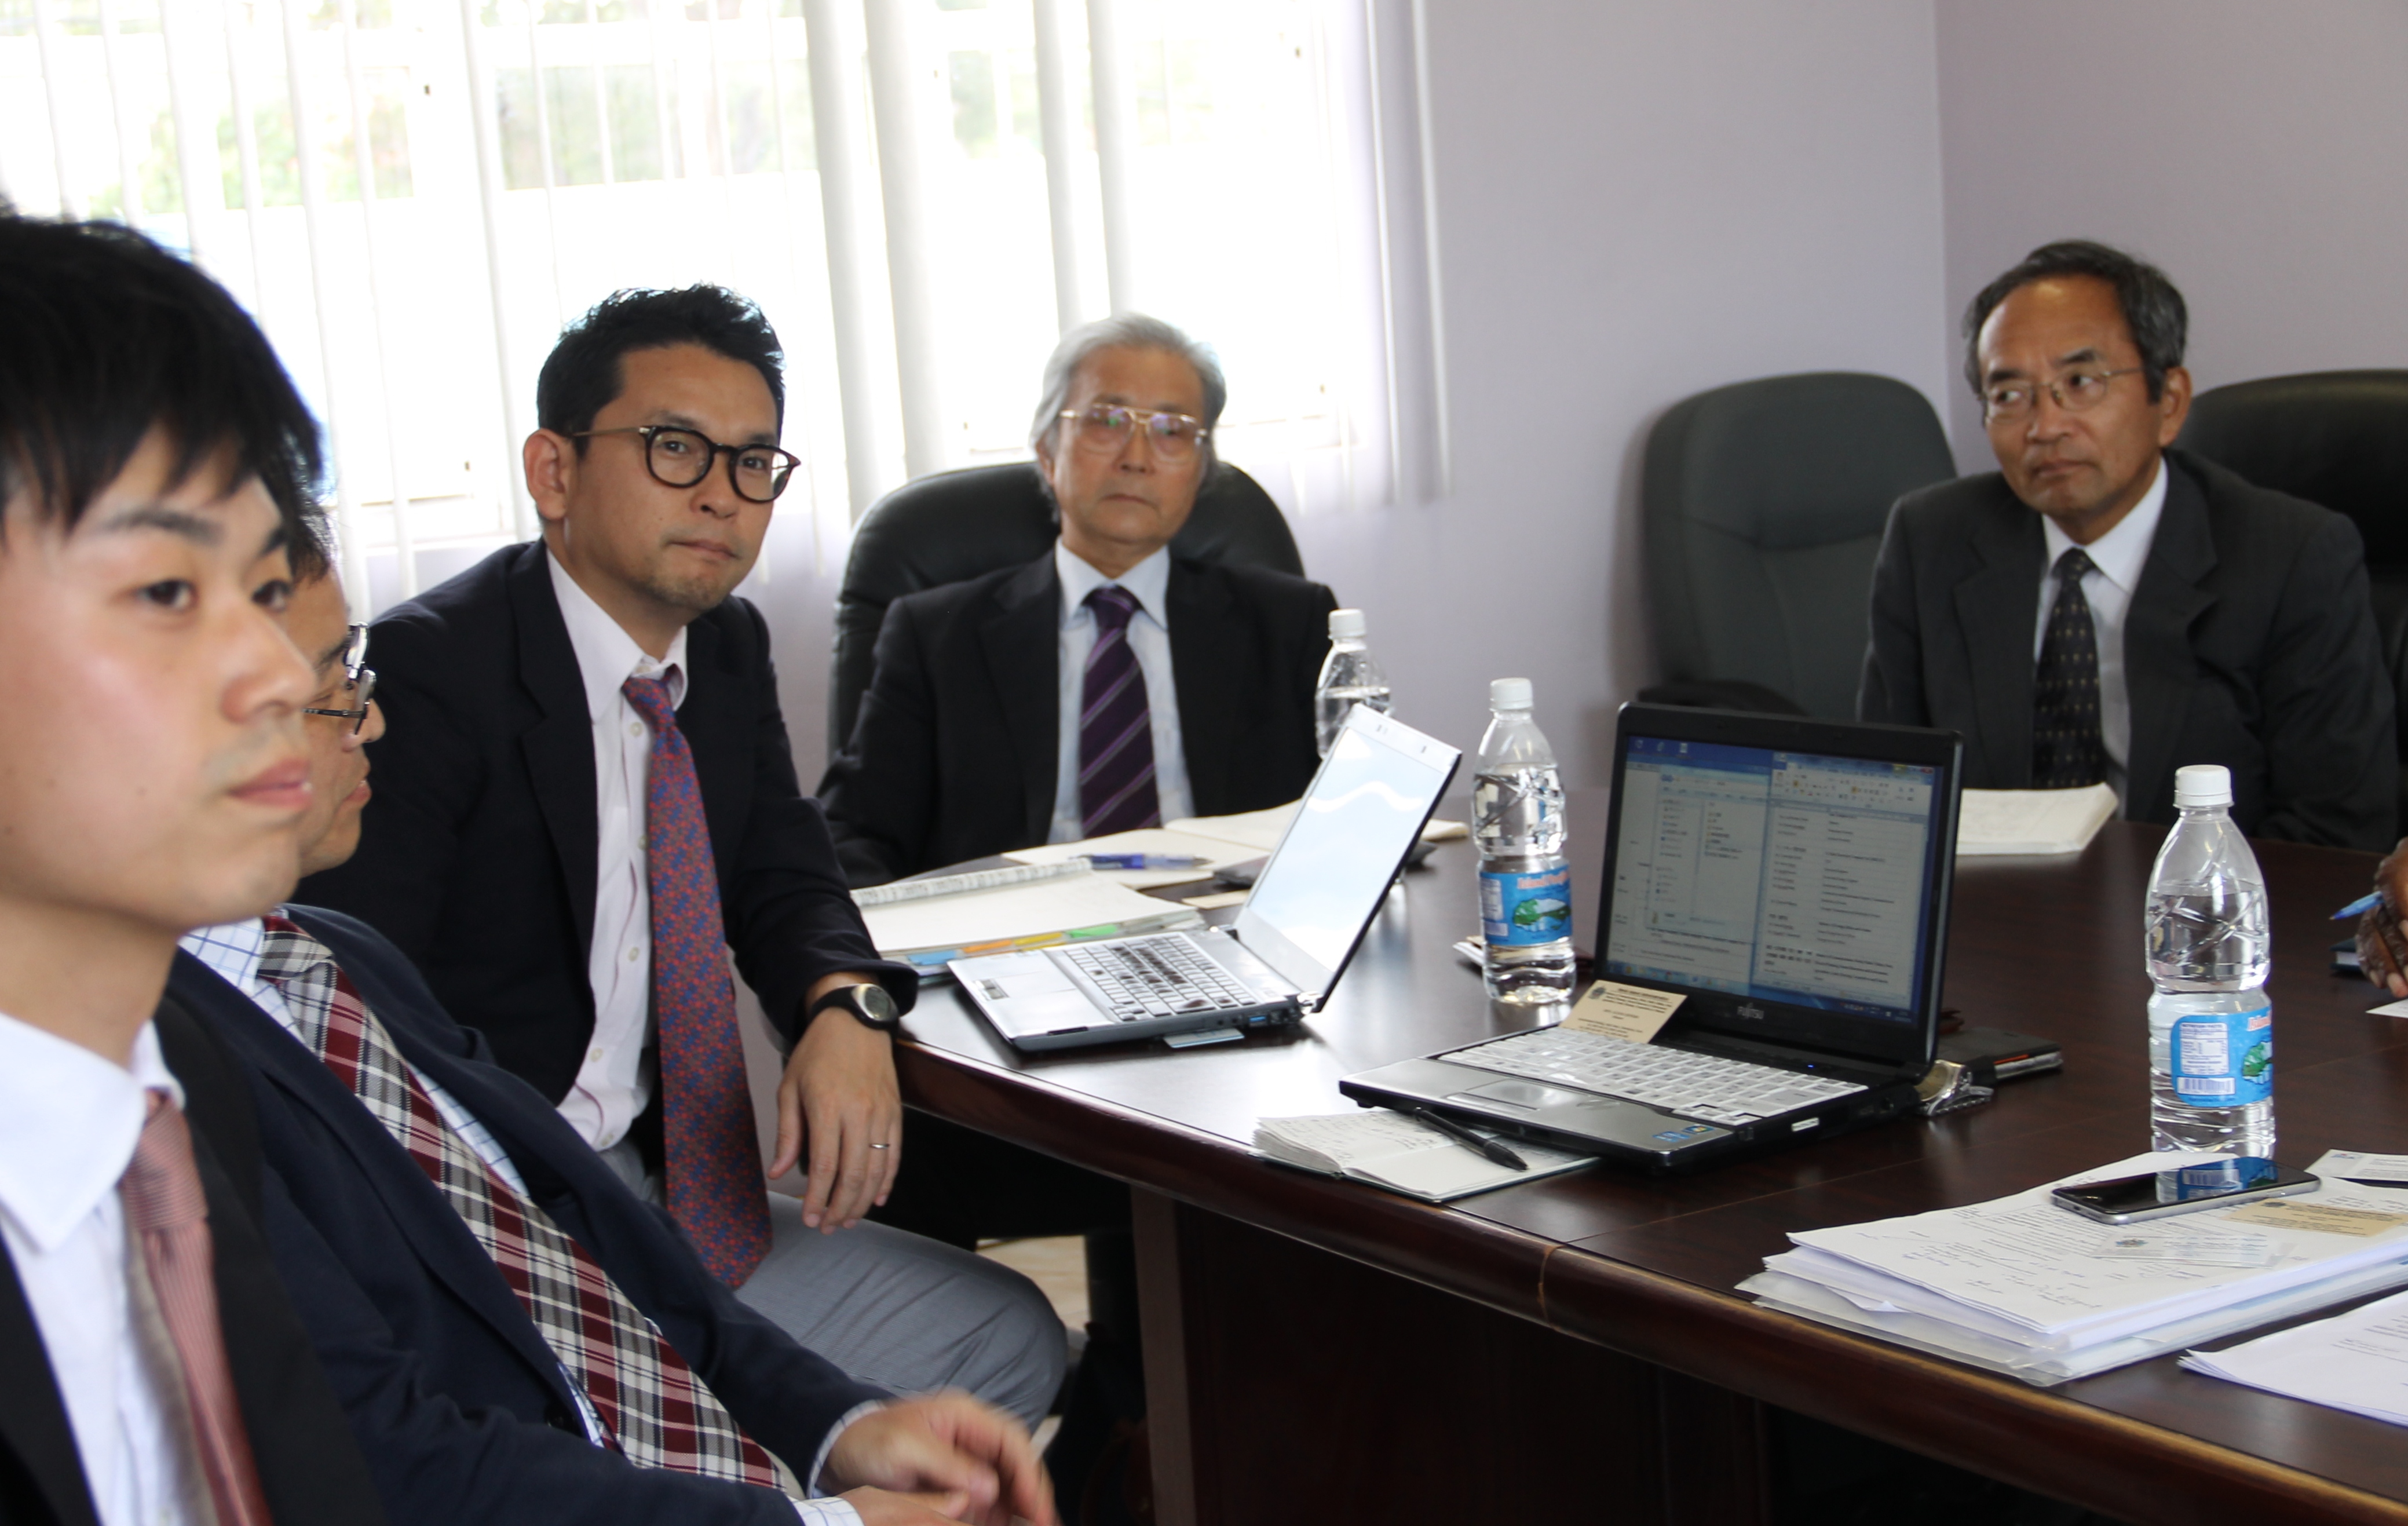 Other members of the Japan International Corporation Agency six-member team during a meeting with Minister responsible for Energy, Natural Resources and Public Utilities on Nevis Hon. Alexis Jeffers at the Nevis Island Administration conference room in Charlestown on March 01, 2016 